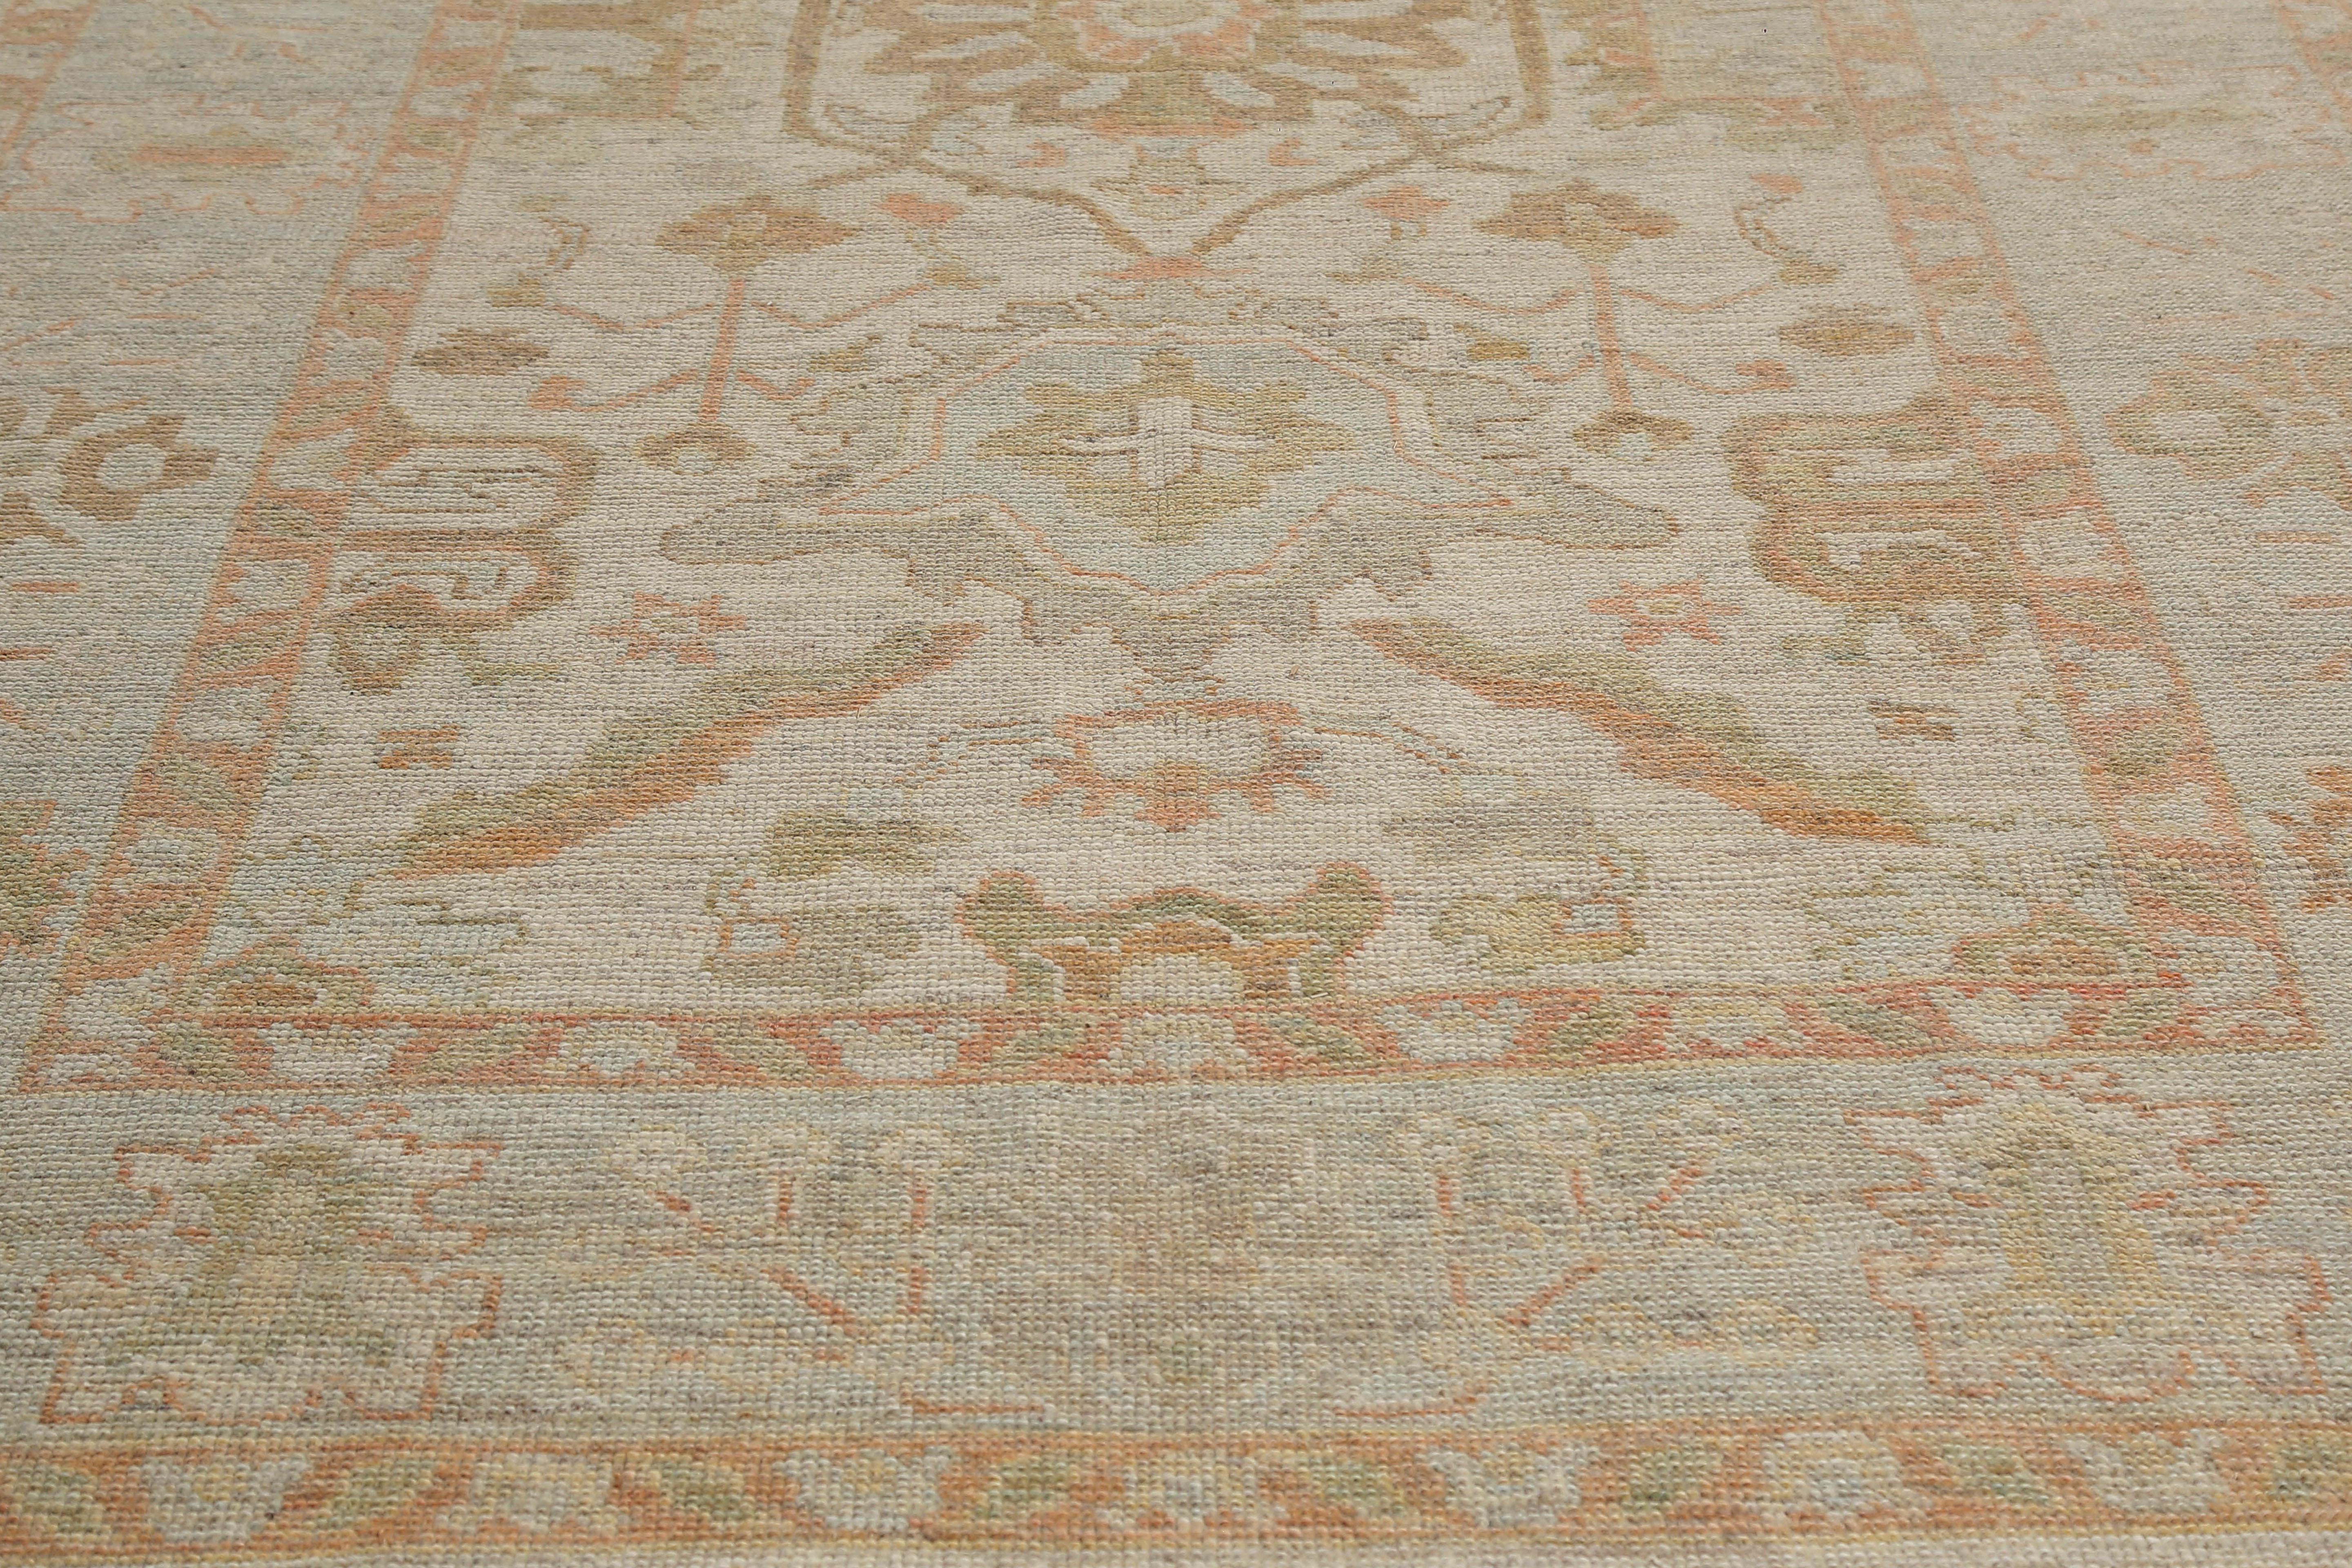 Wool Exquisite Turkish Handmade Oushak Rug For Sale